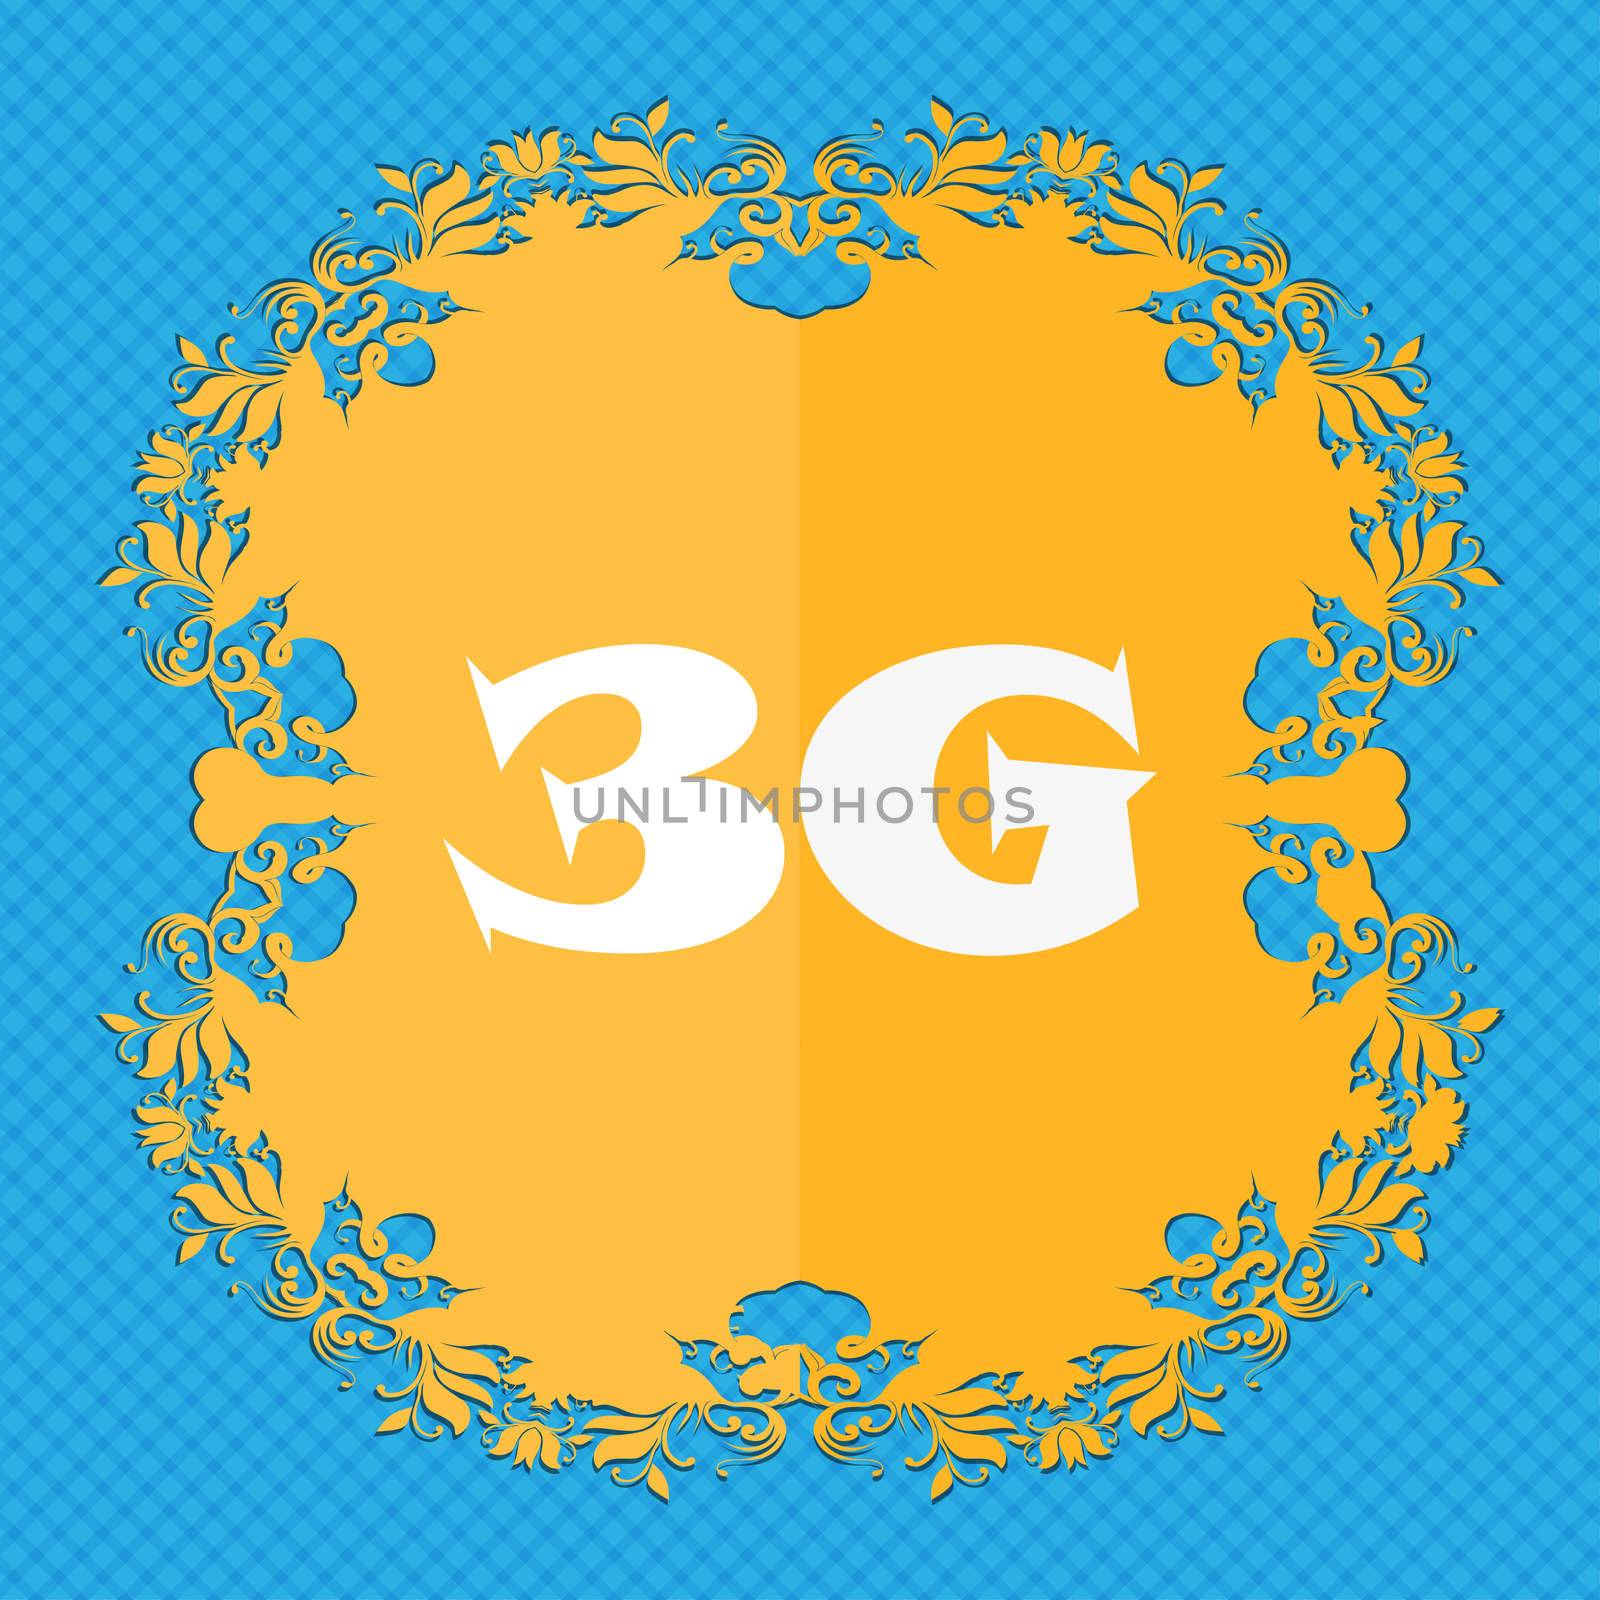 3G sign icon. Mobile telecommunications technology symbol. Floral flat design on a blue abstract background with place for your text. illustration